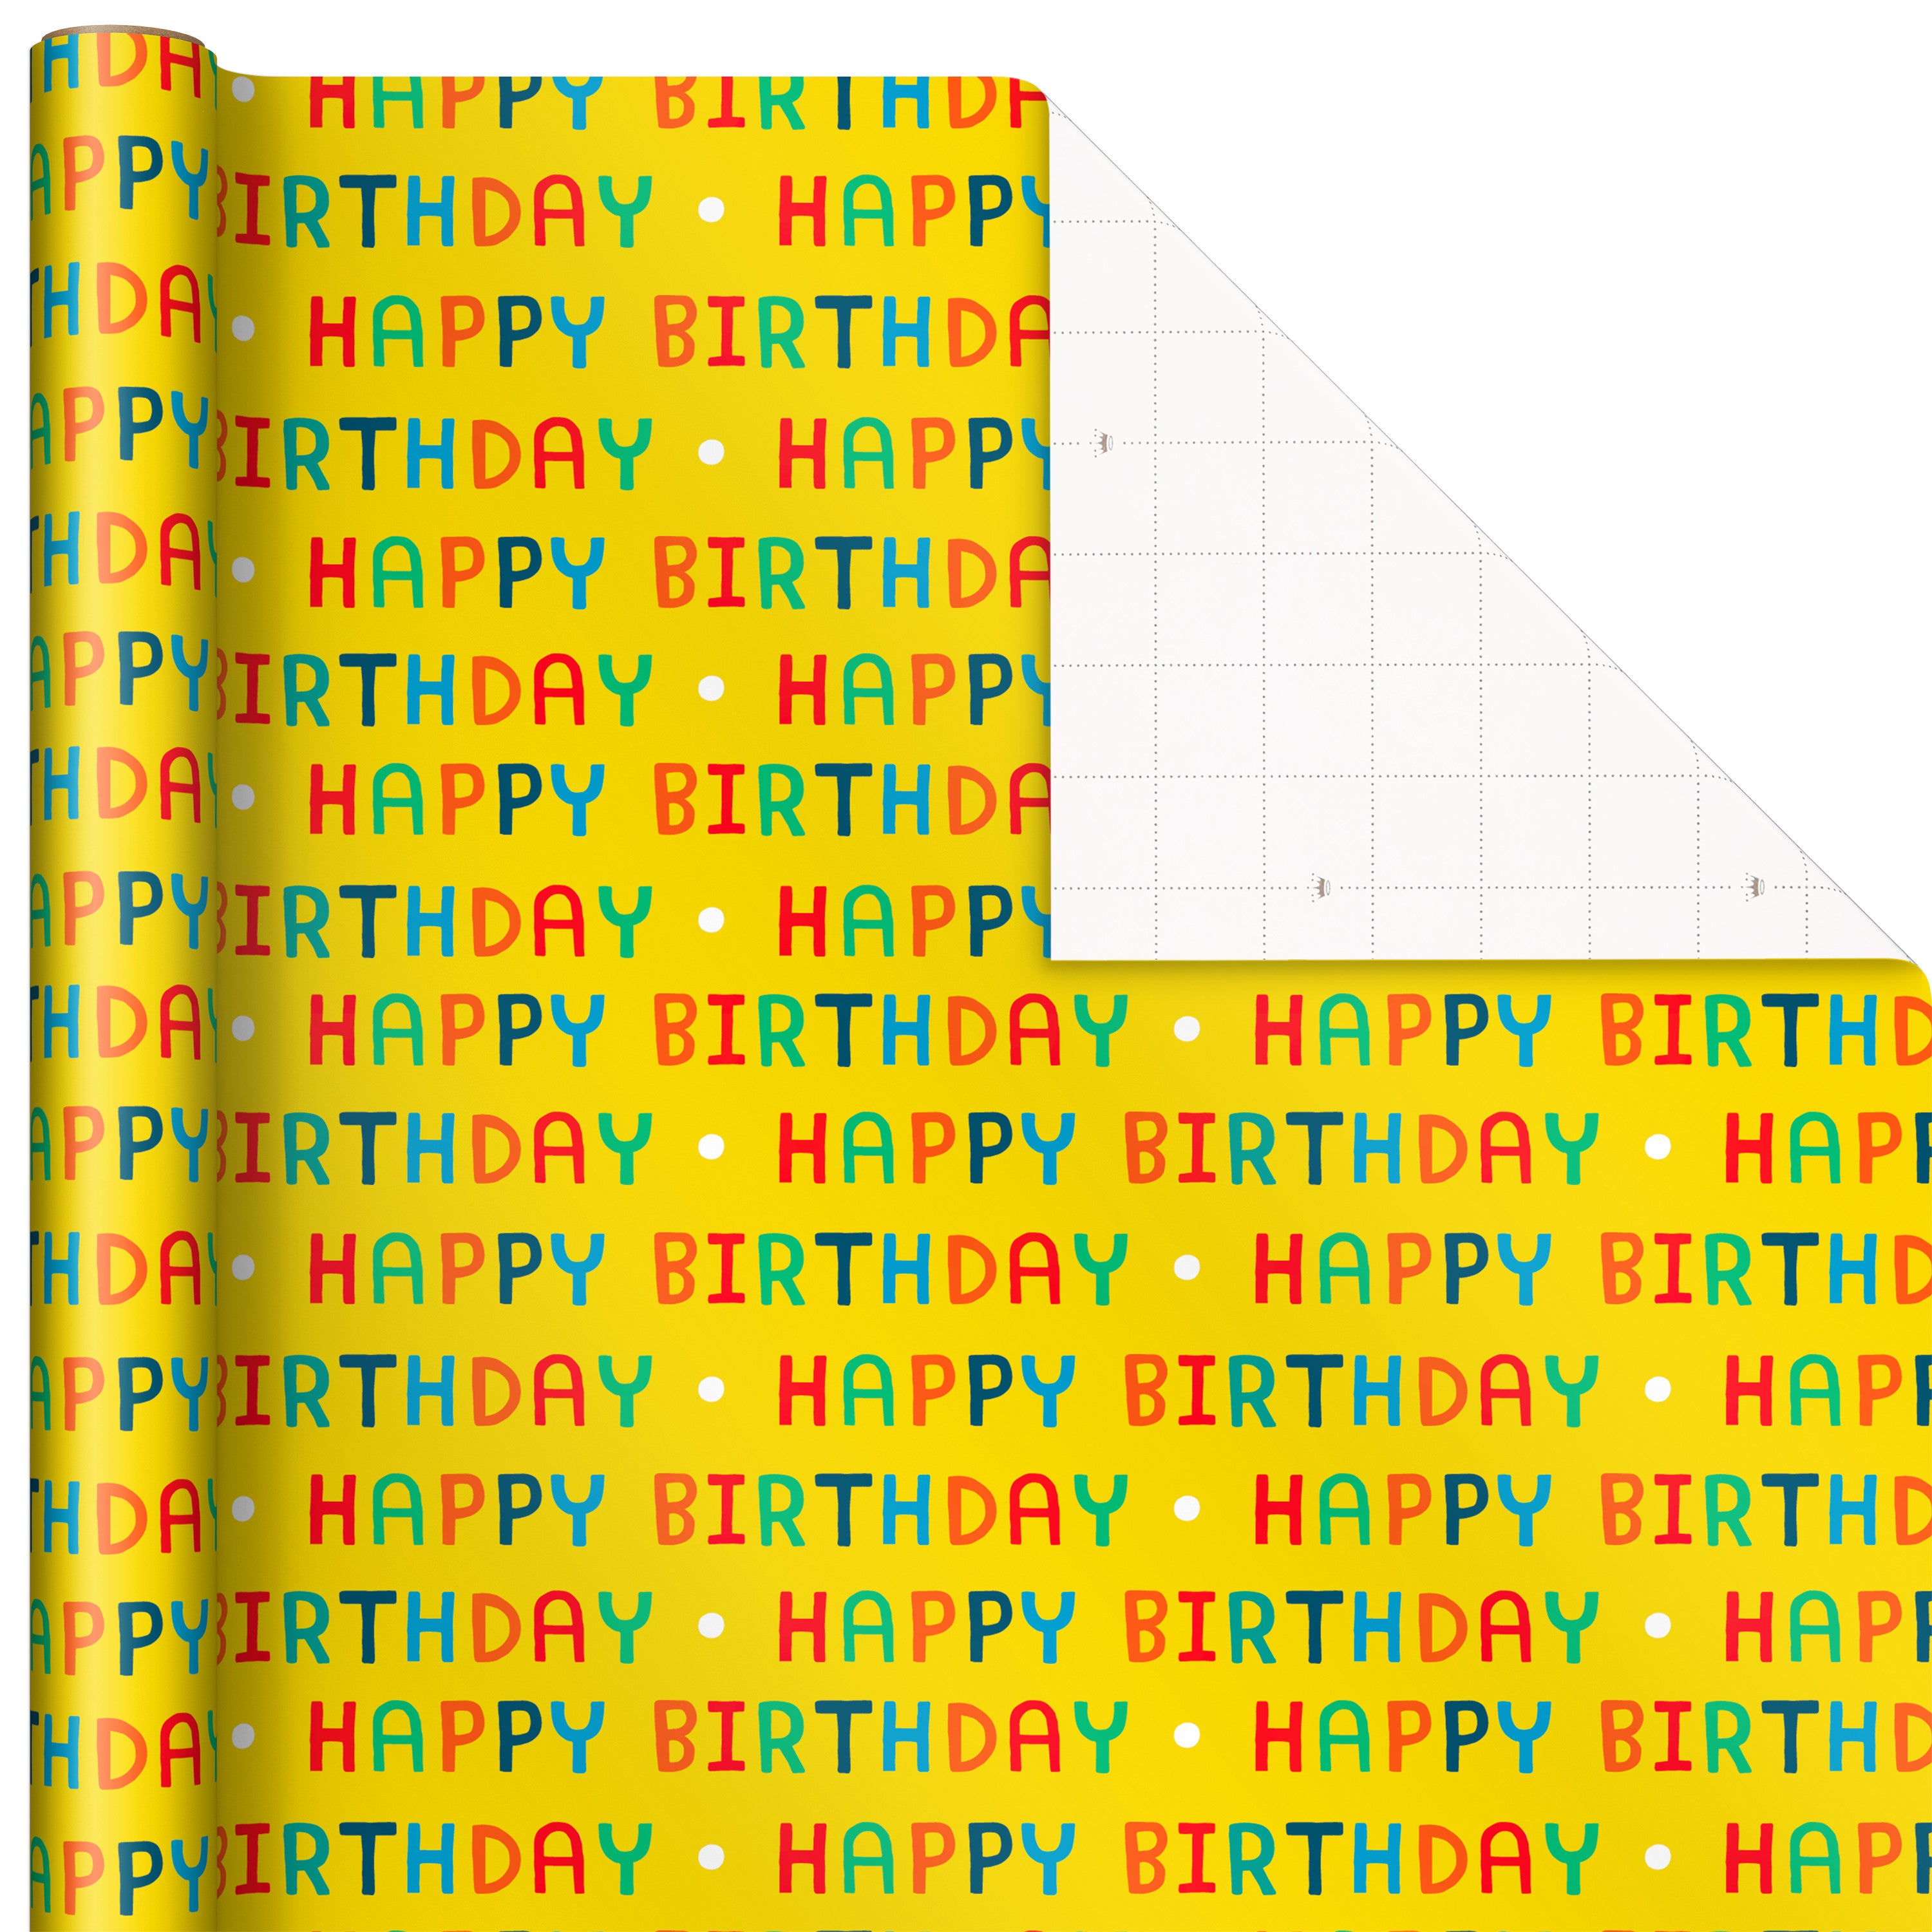 Kids Birthday Wrapping Paper (3 Rolls: 75 sq. ft. total) Pink Rainbows, Blue Dinosaurs, Yellow "Happy Birthday"